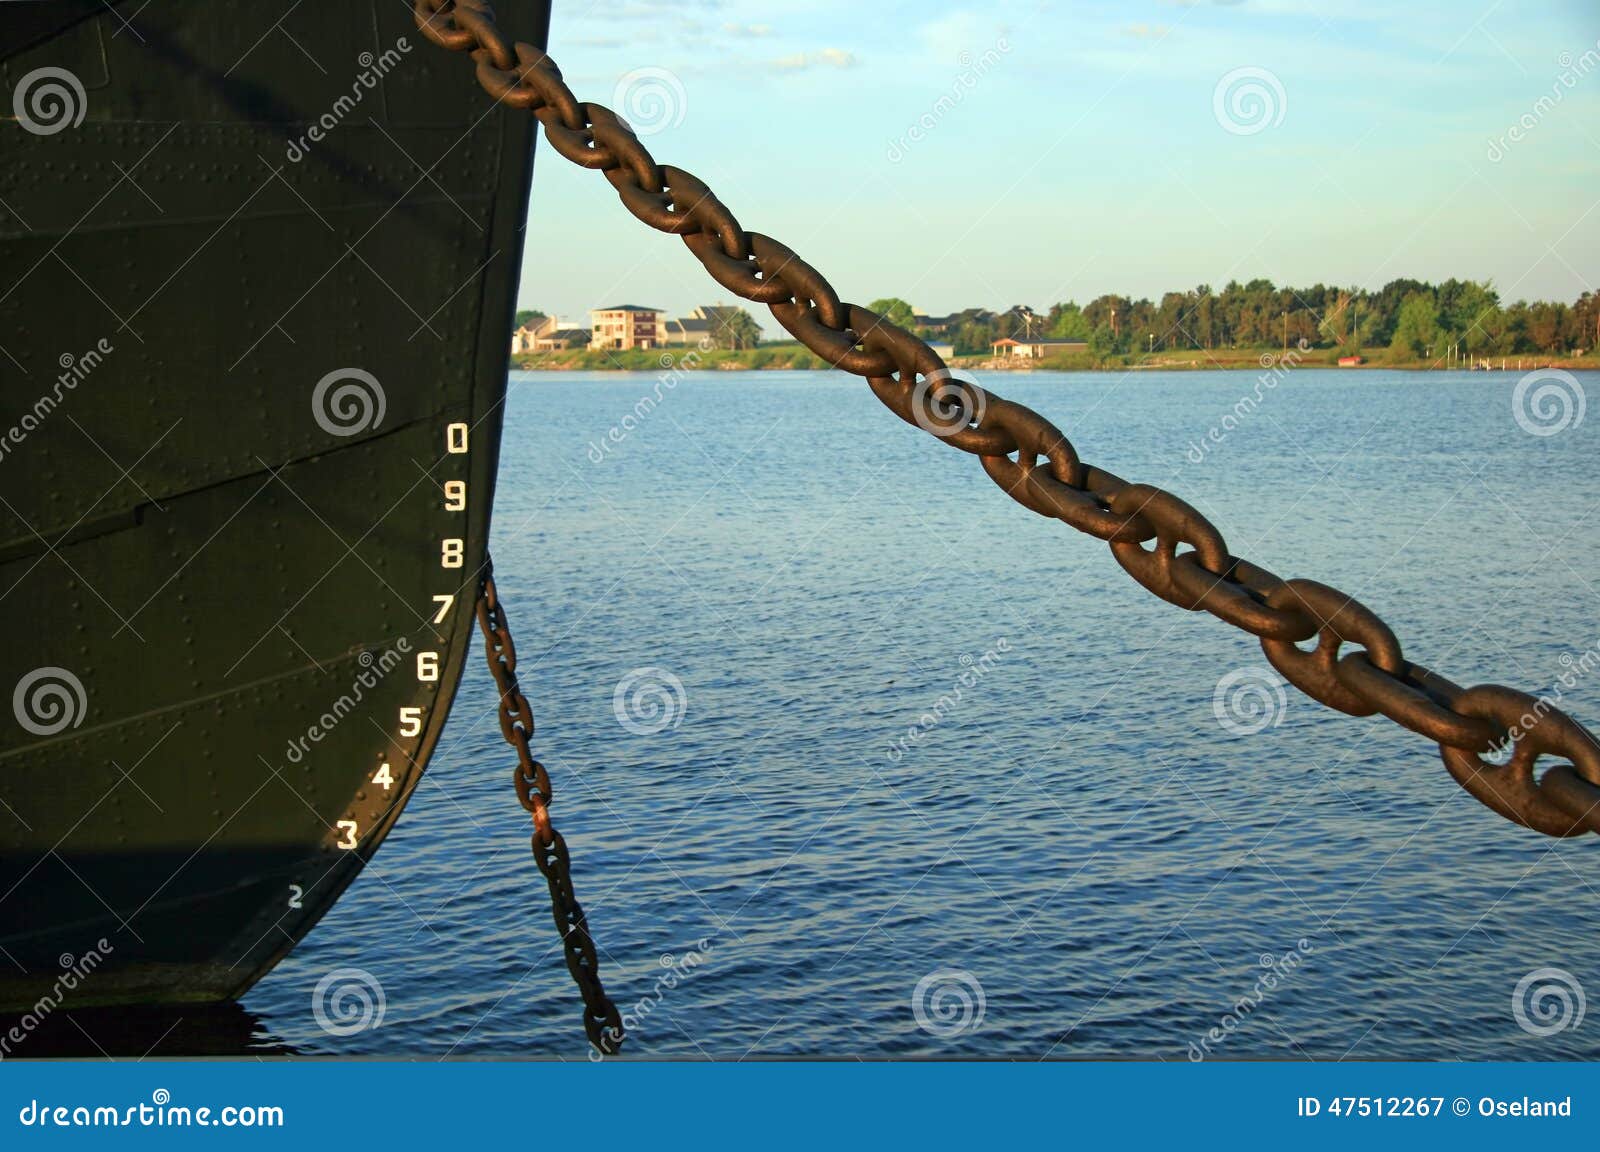 Ship S Bow and Anchor Chain Stock Image - Image of michigan, blue: 47512267